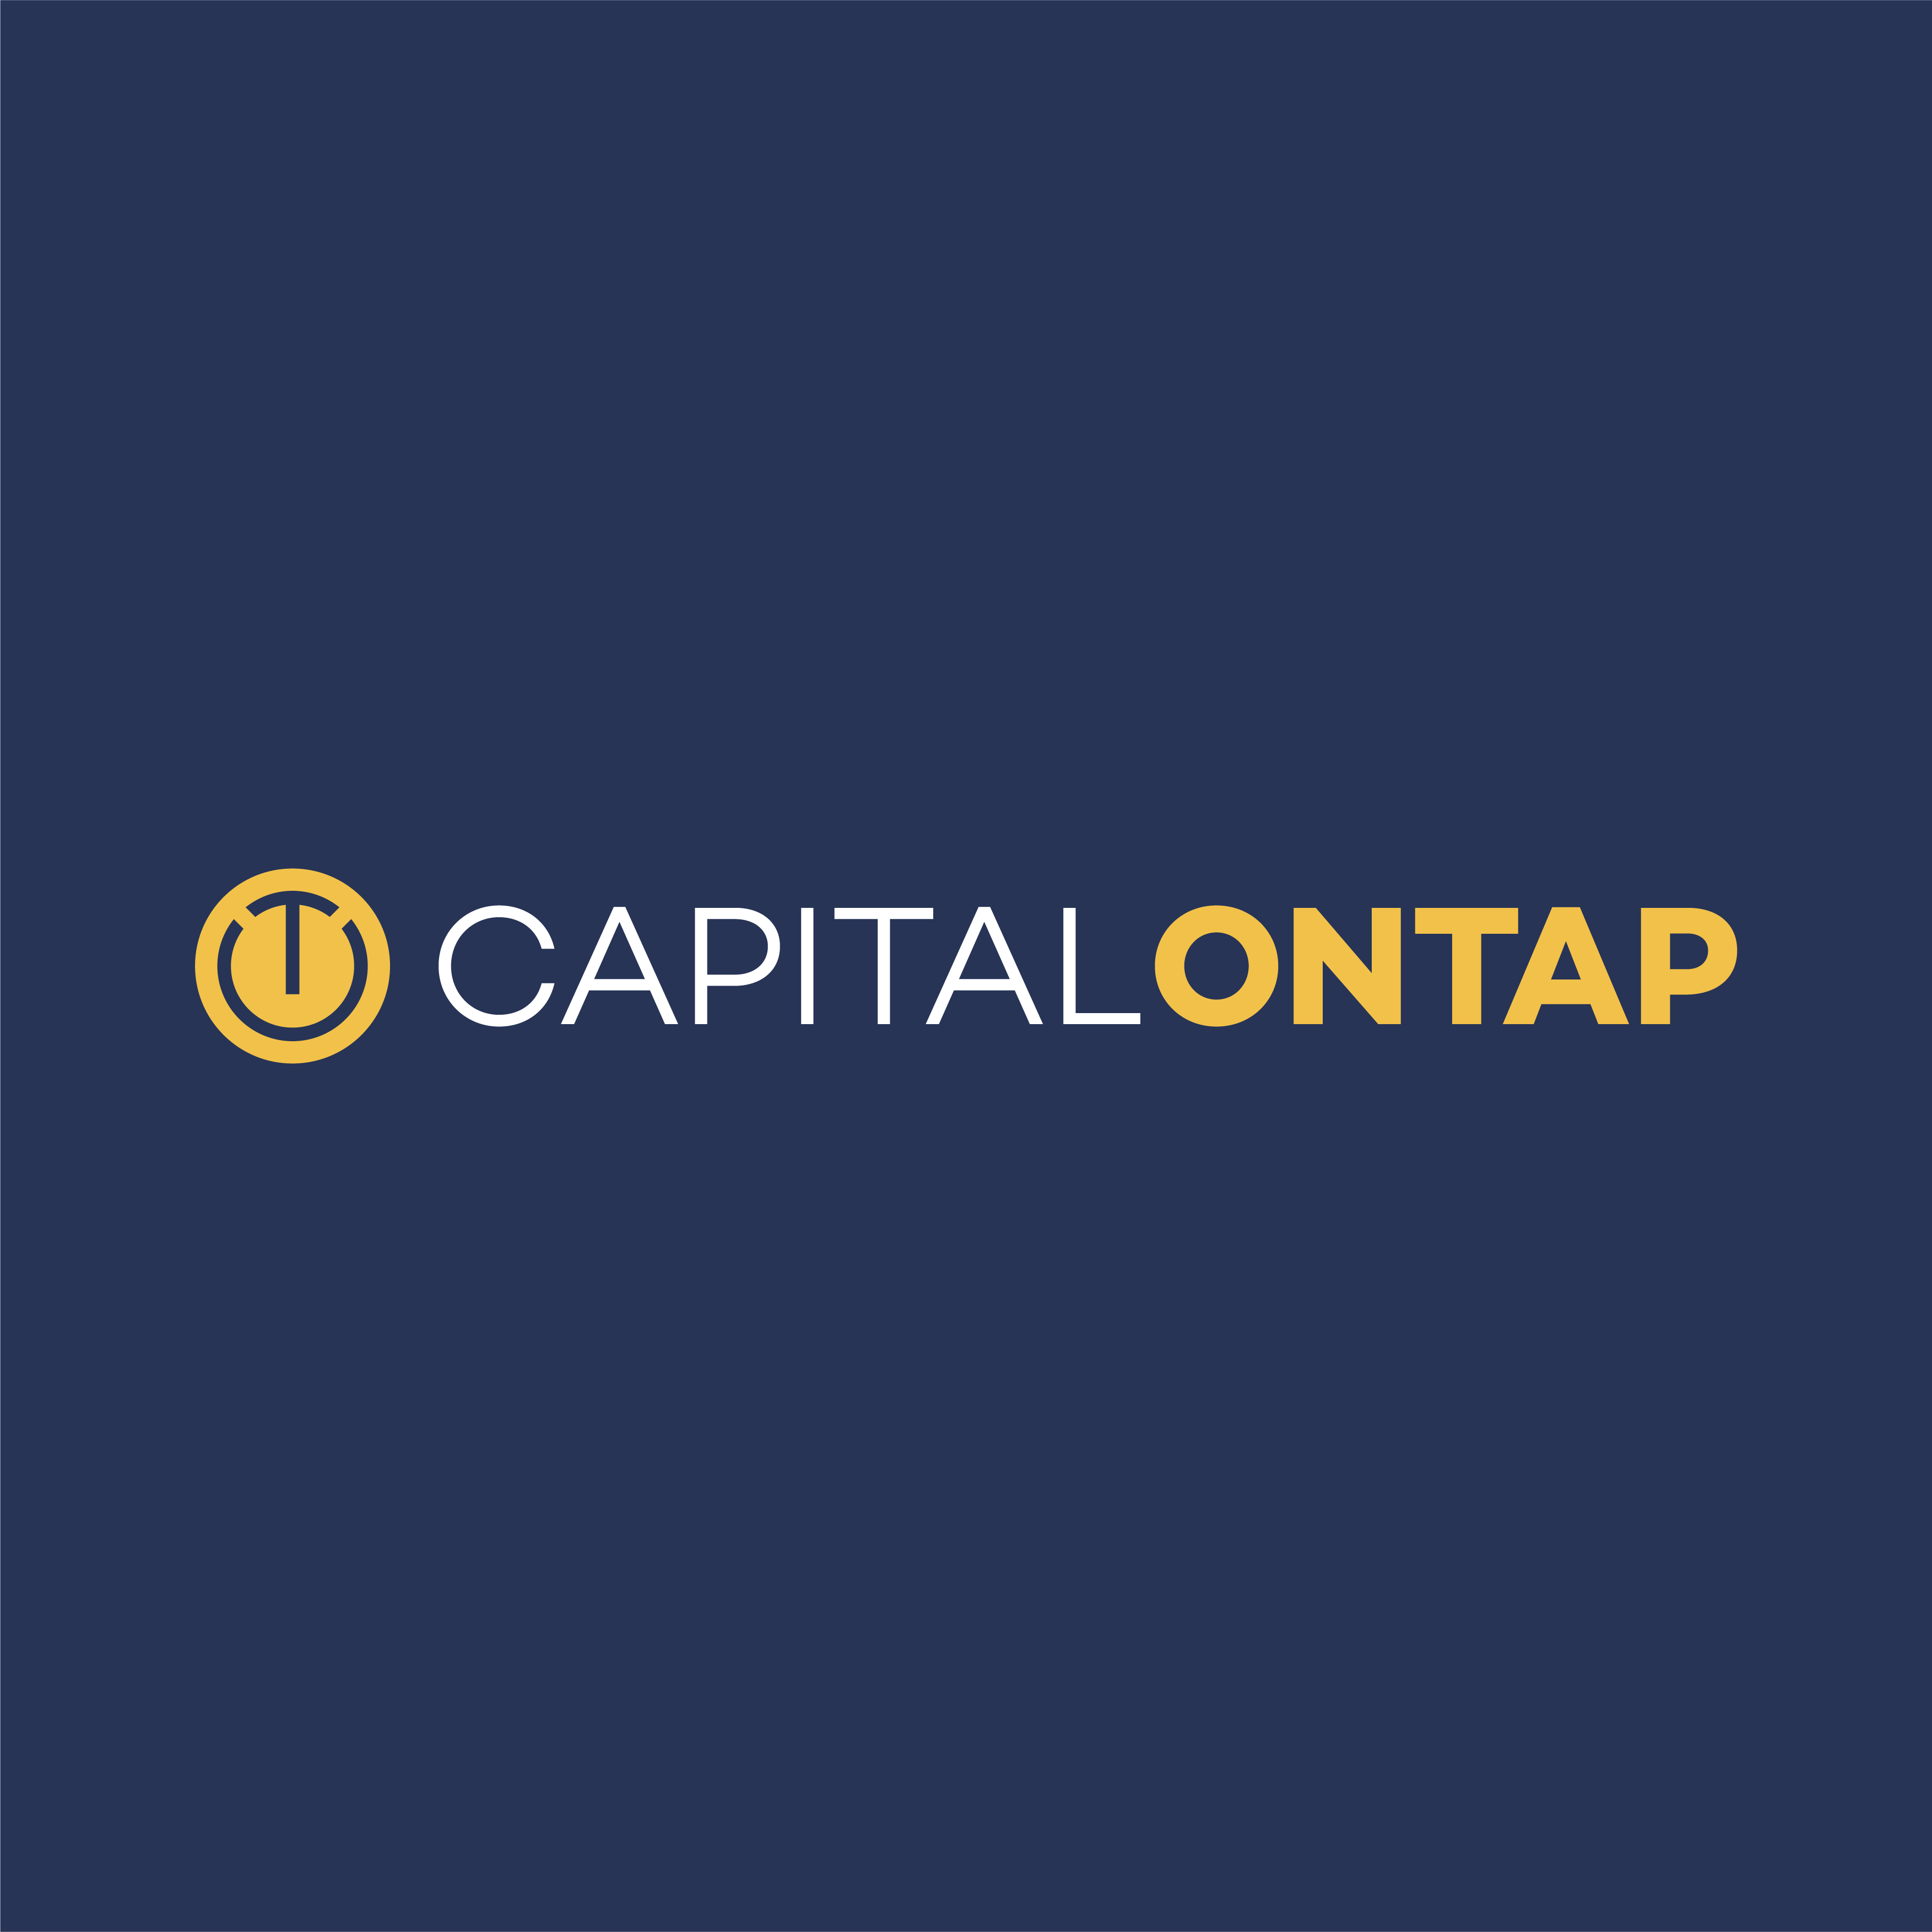 Captial on Tap Promo Code